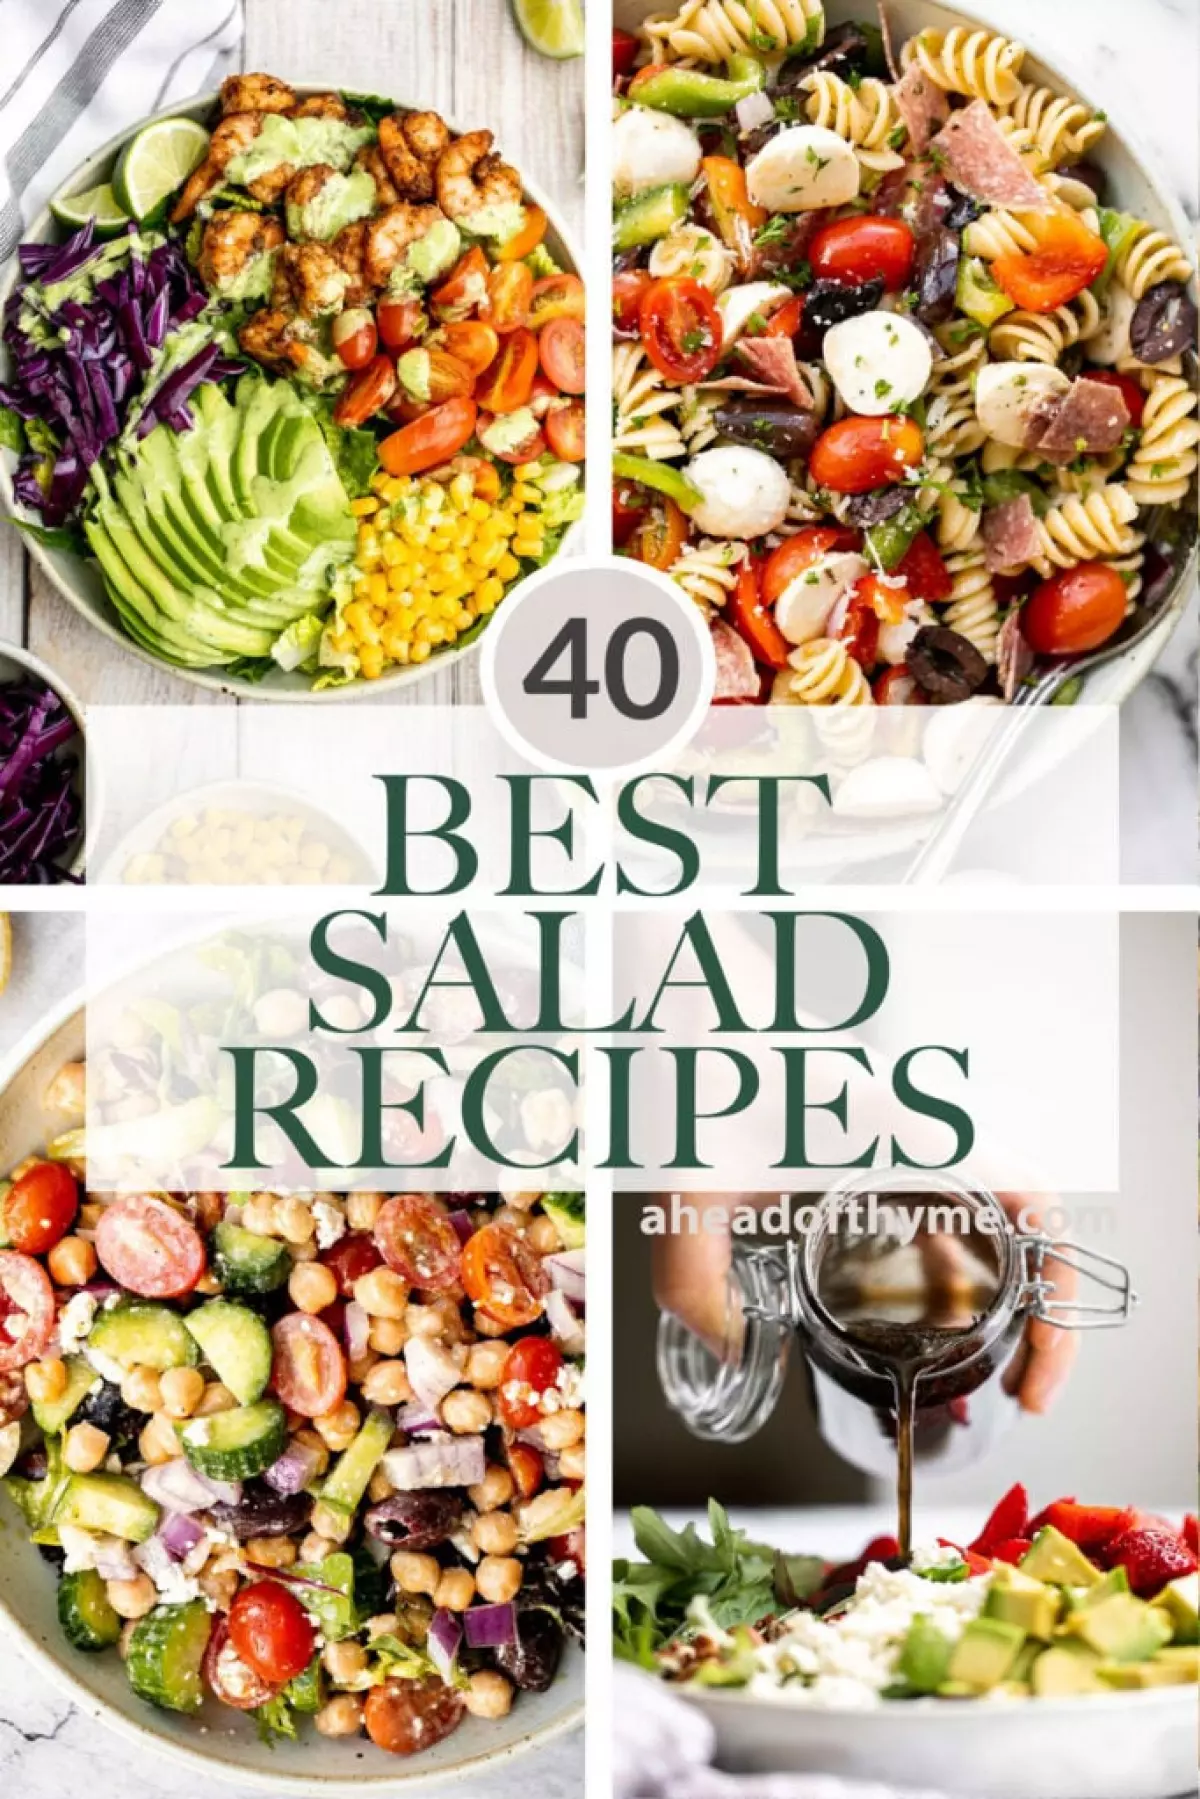 Browse over 40 best and most popular salad recipes including classic summer salads, salad with fruit, Mexican salads, Asian salads, and fall and winter salads.